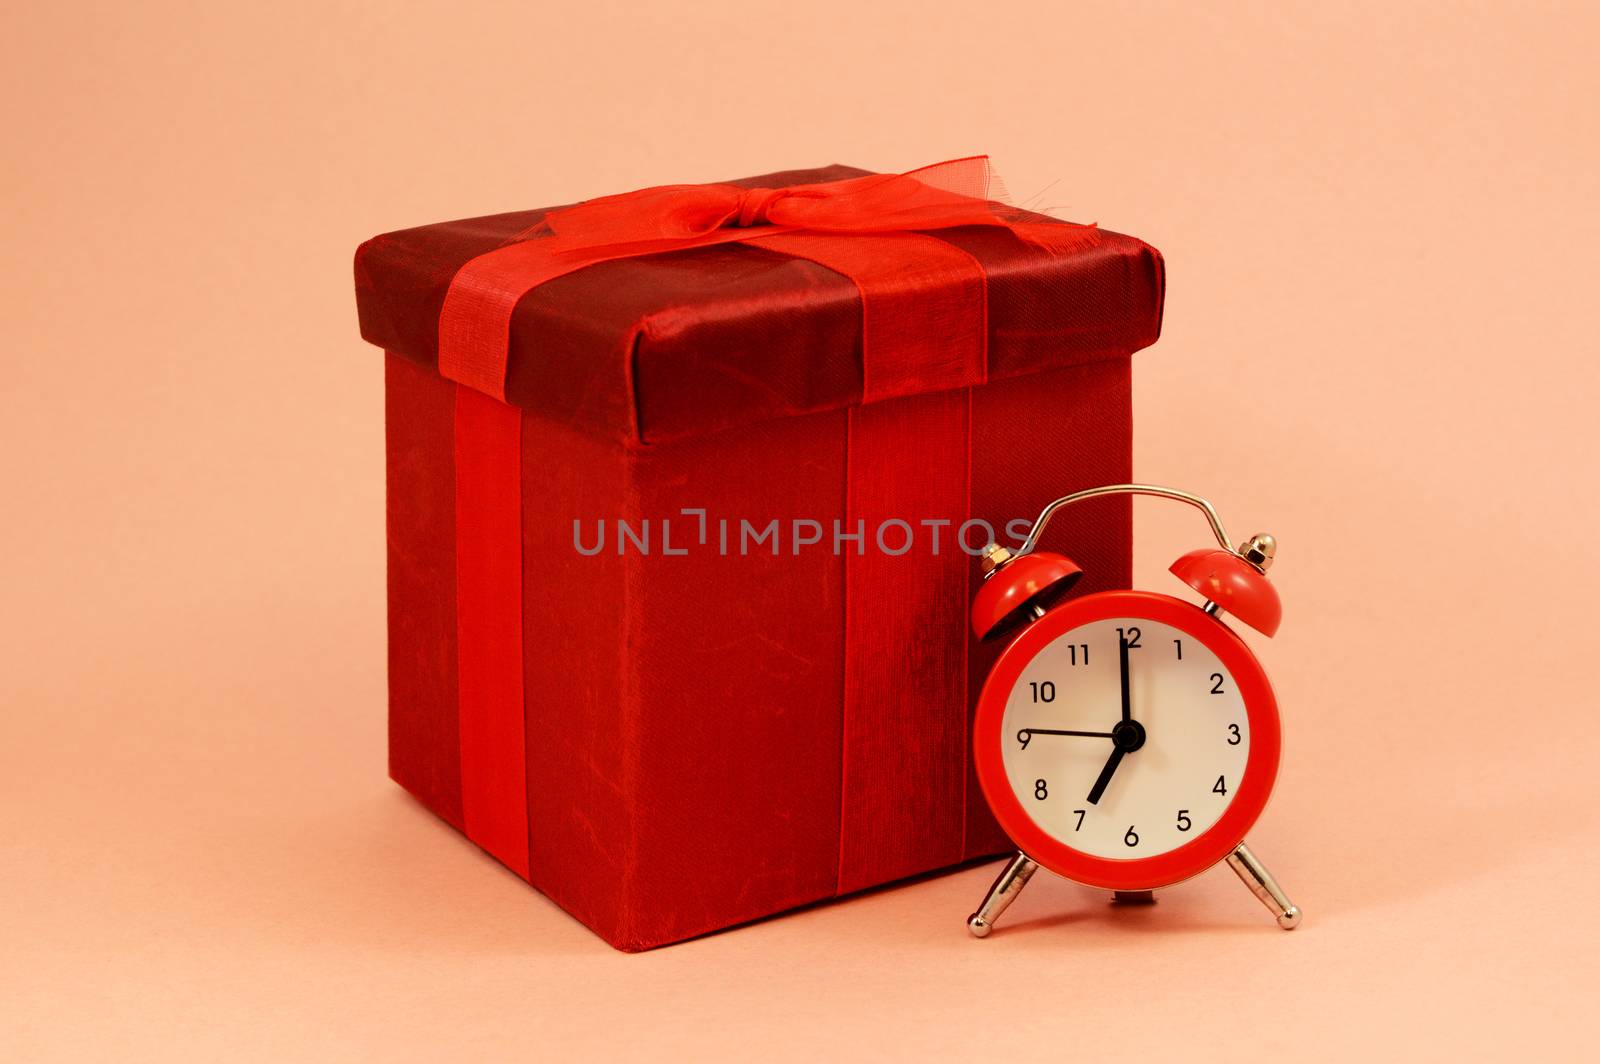 An isolated red gift box and alarm clock to represent that theres no time like the present.